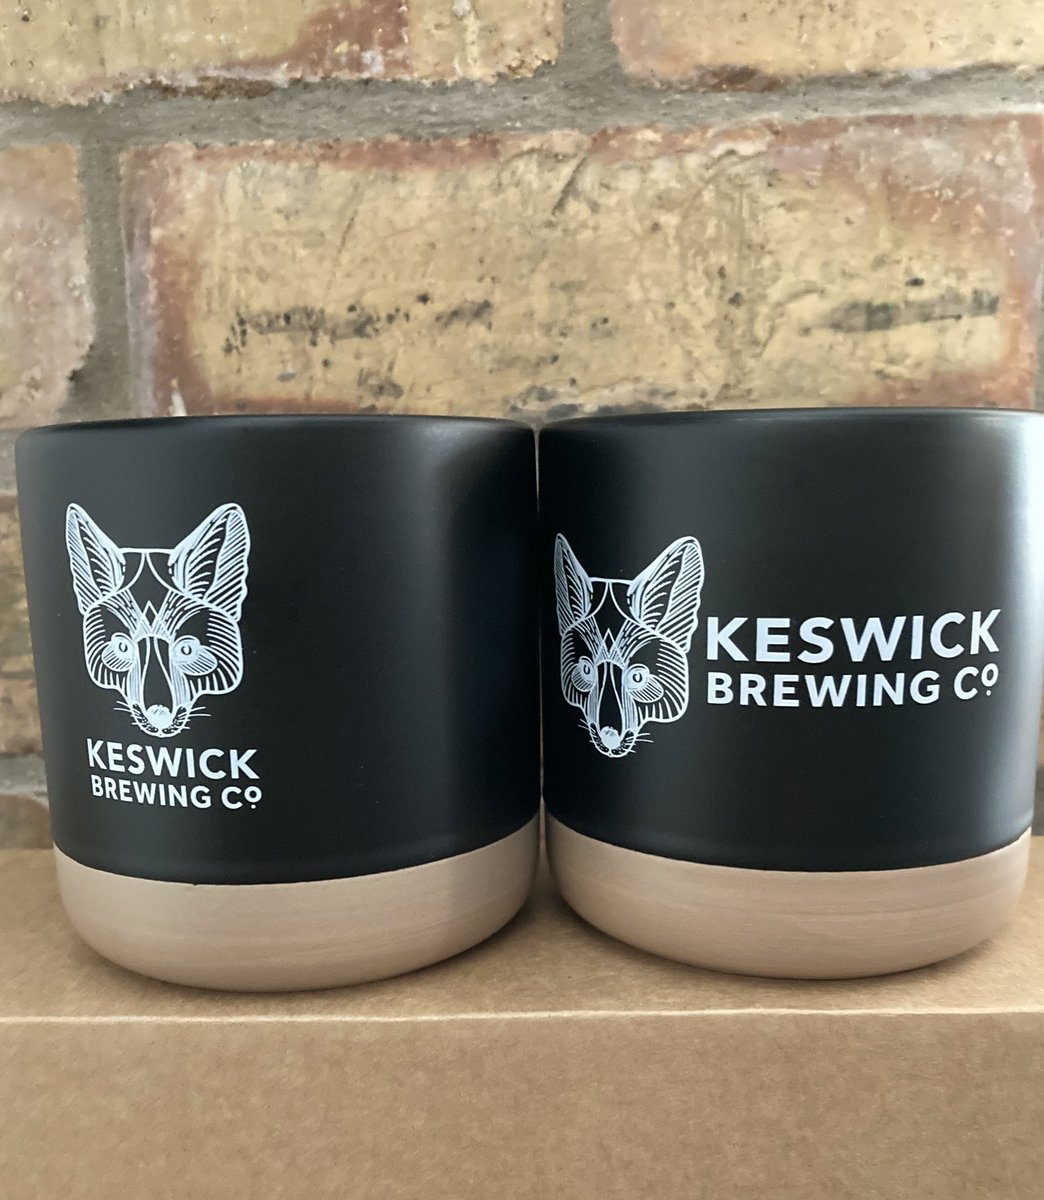 We have two new mug designs. We are loving these new clay mugs featuring our Fox. They are both available in our Brewery shop and will be available online soon. Which one will you choose?